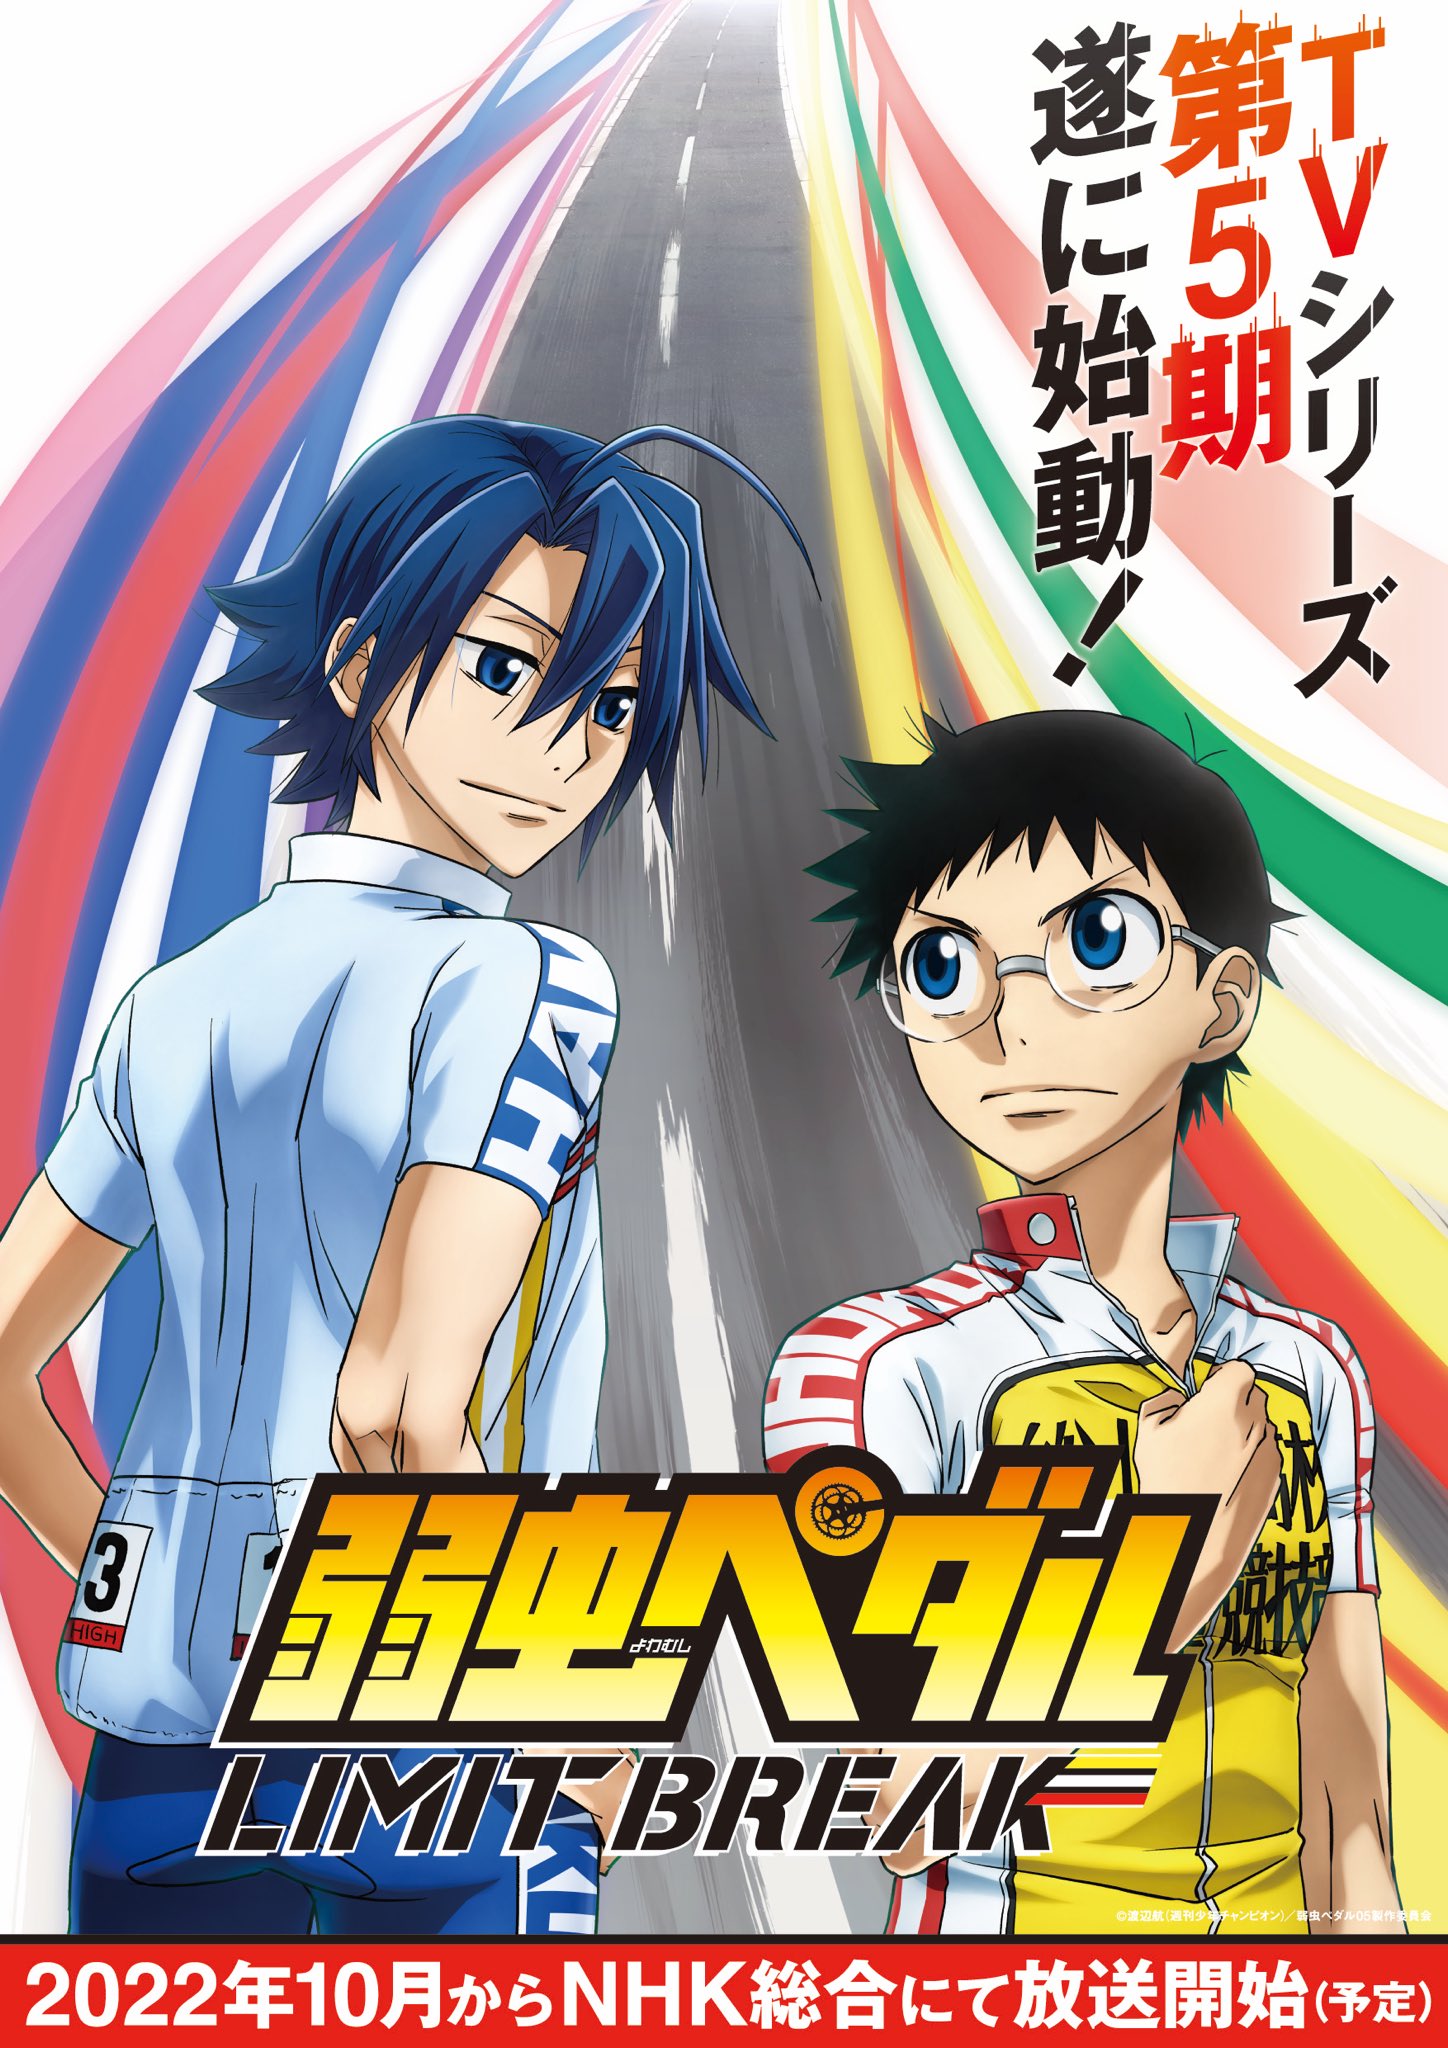 Yowamushi Pedal: Limit Break Ride Visual revealed and Atsushi Abe also commented “Abs Ready?” 5th Season will begin in October 2022!